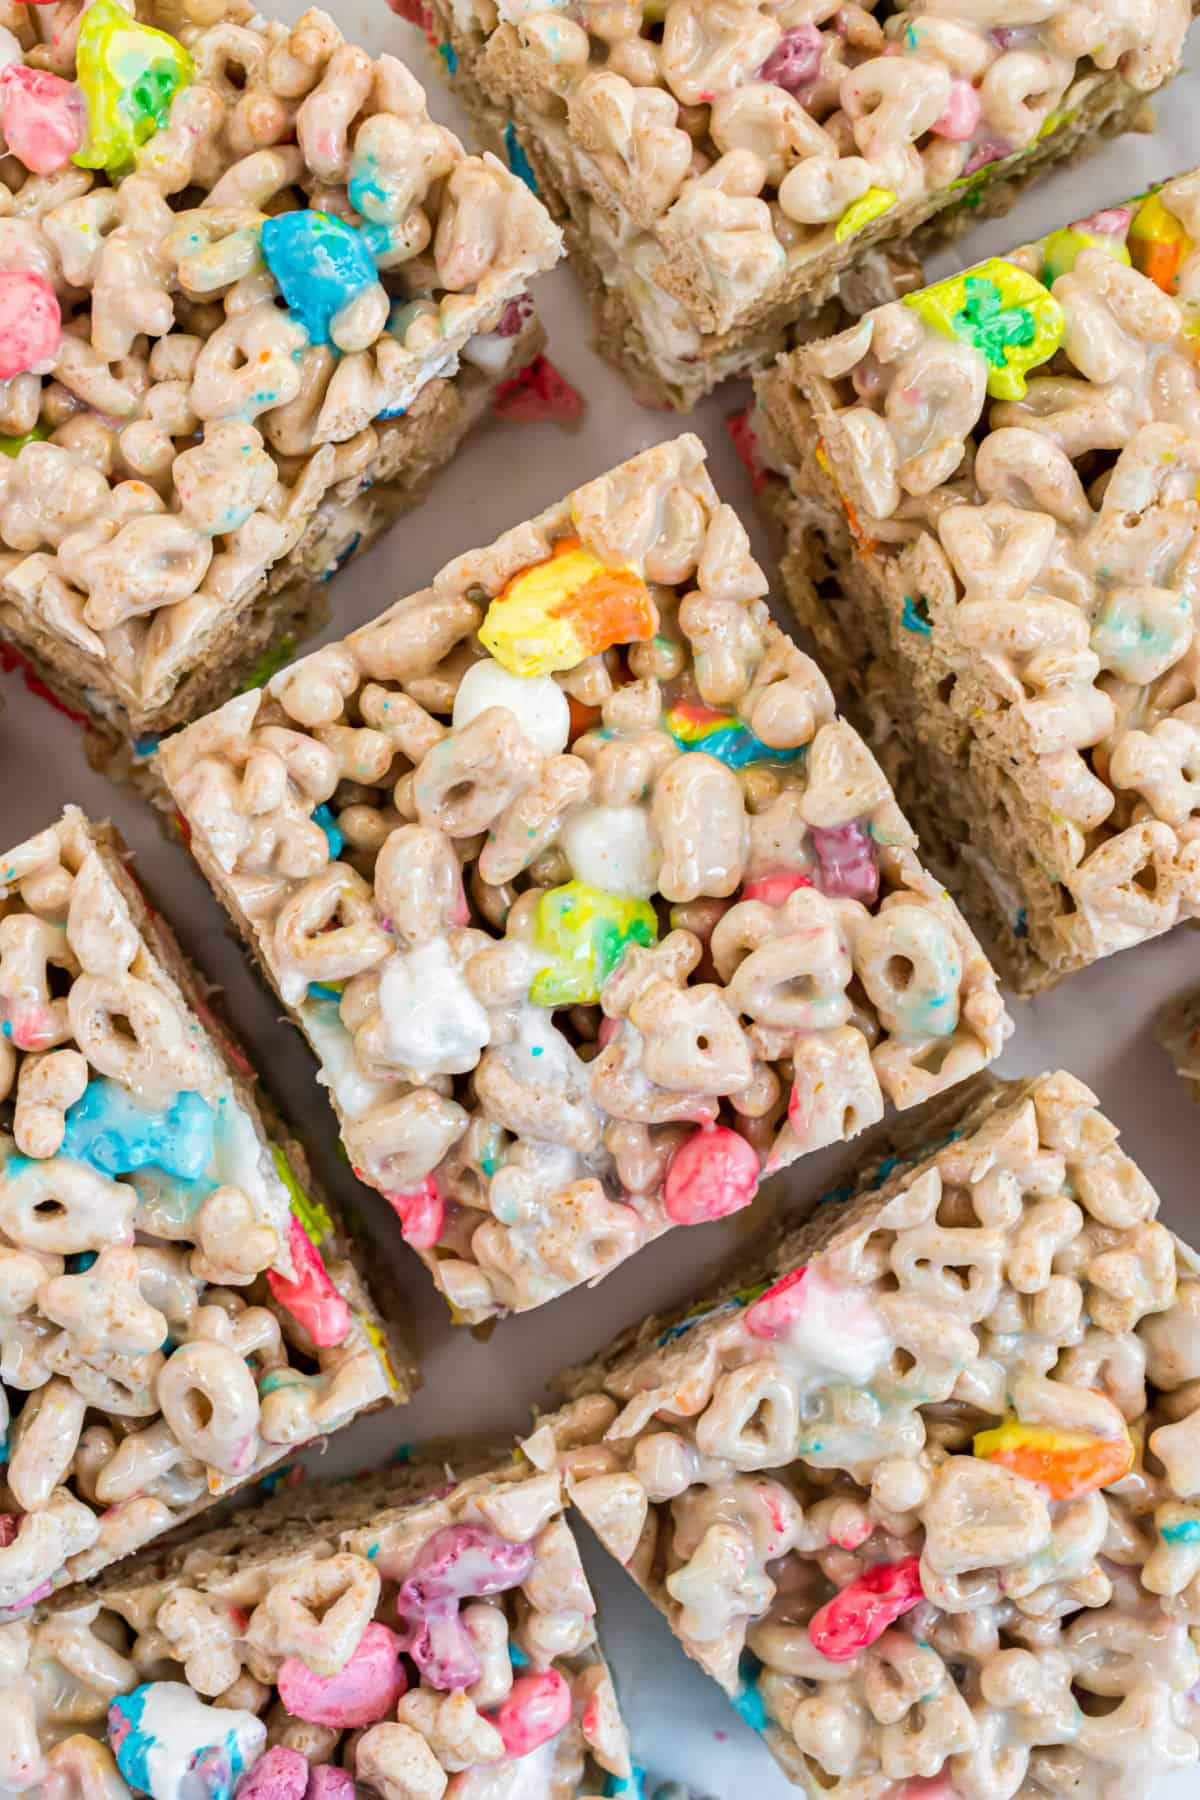 Lucky charms marshmallow treat bars cut into squares on parchment paper.